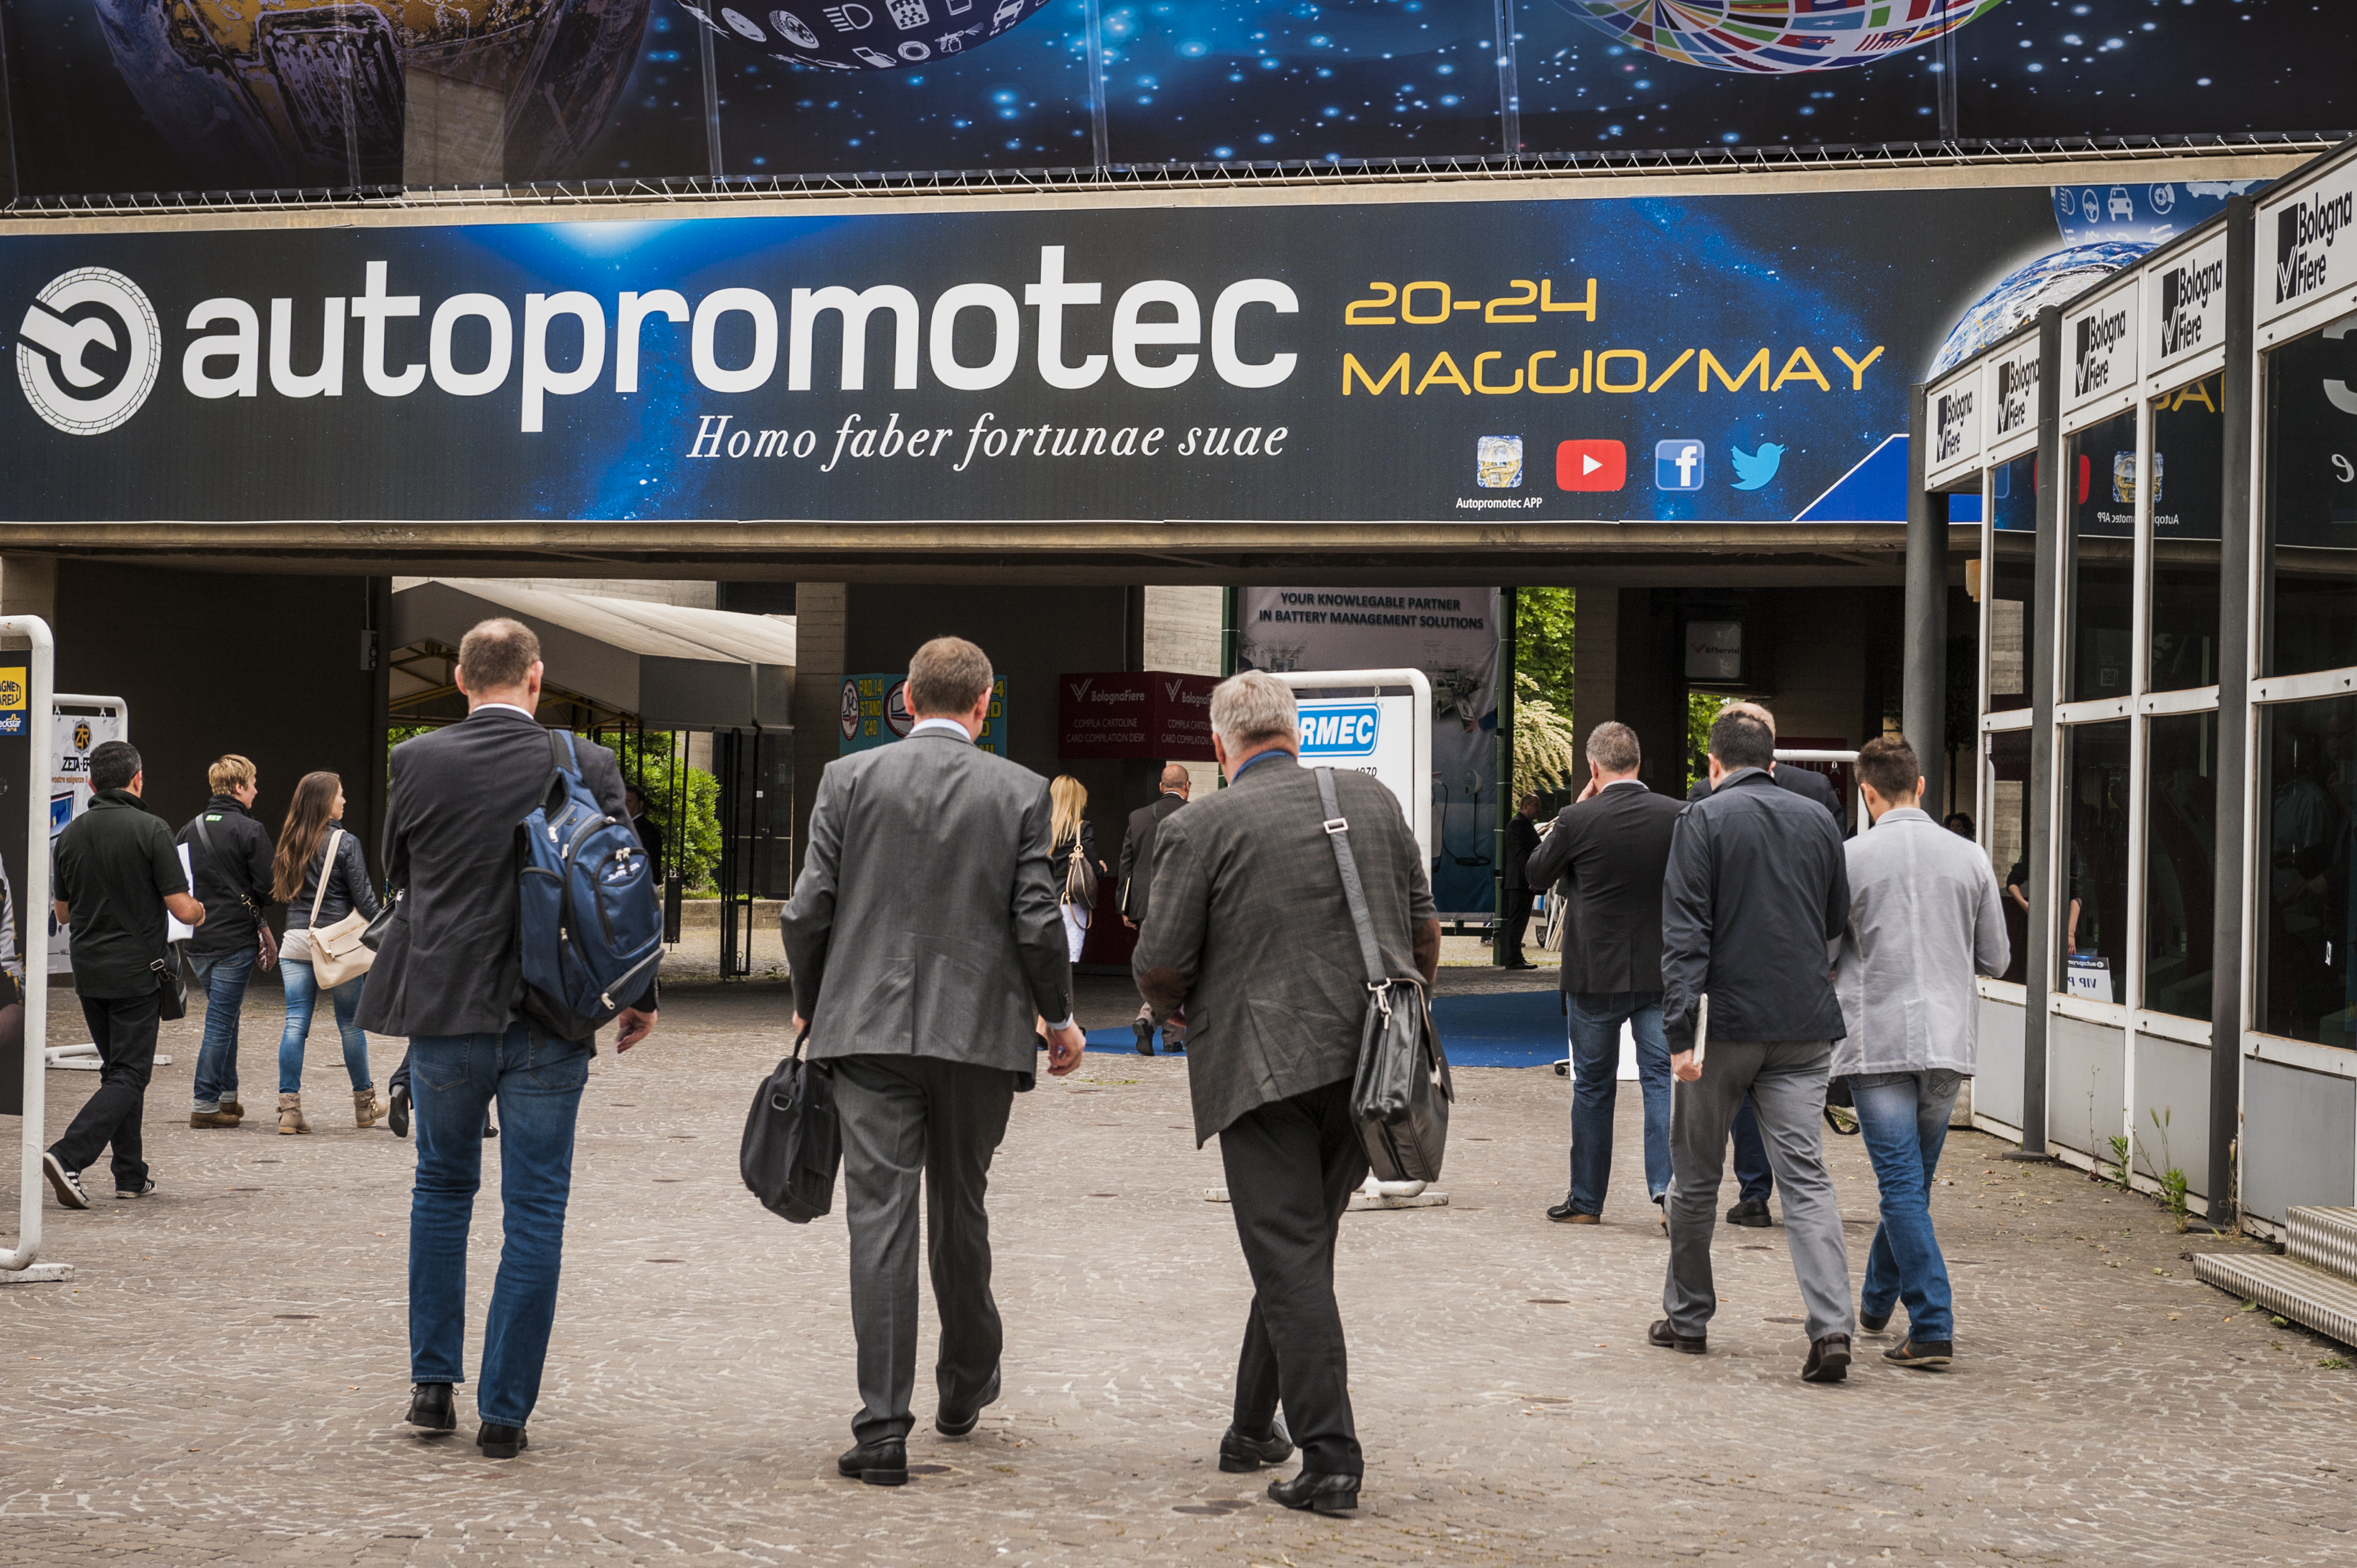 Autopromotec reports strong international growth of visitors, exhibitors